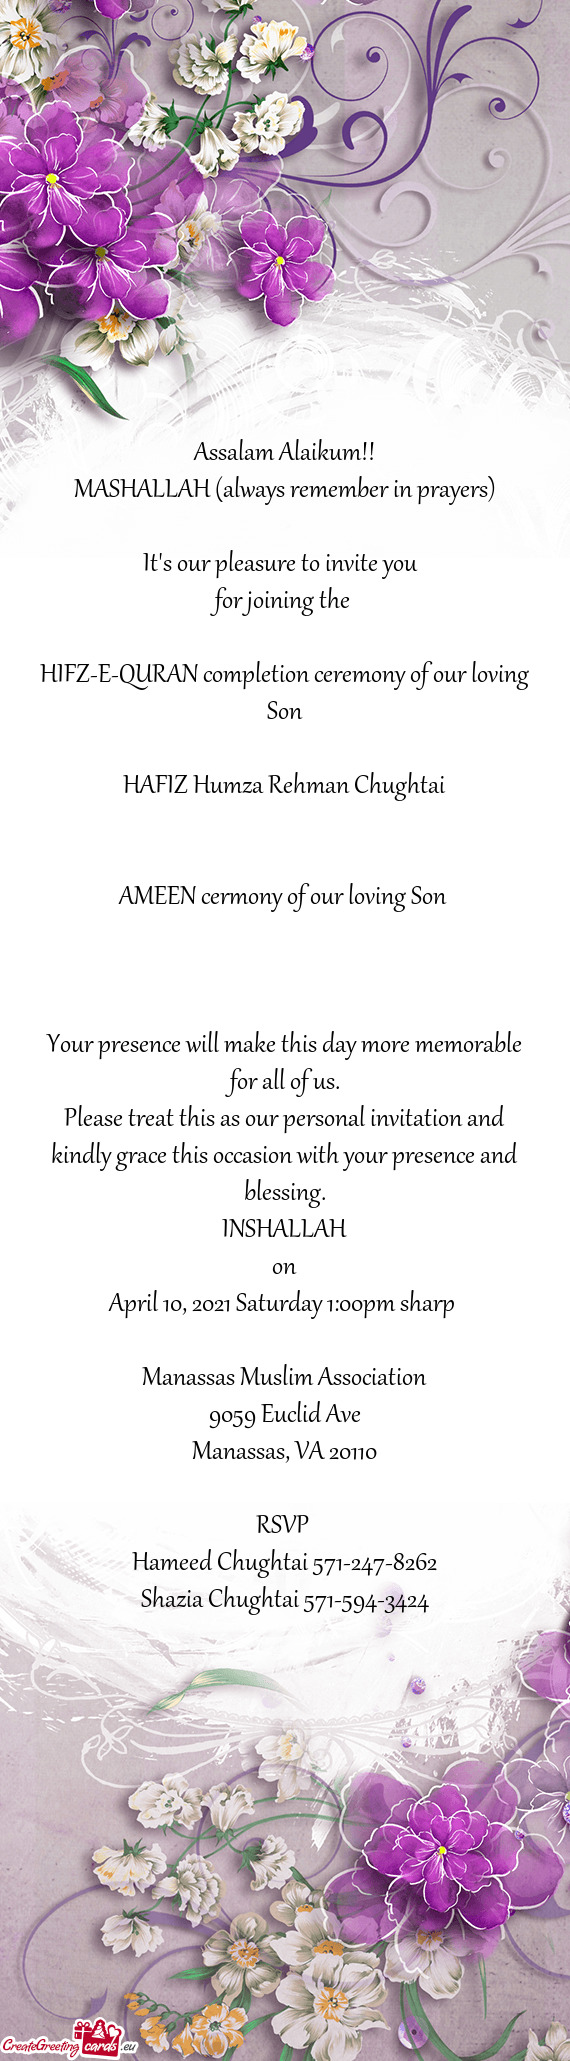 AMEEN cermony of our loving Son